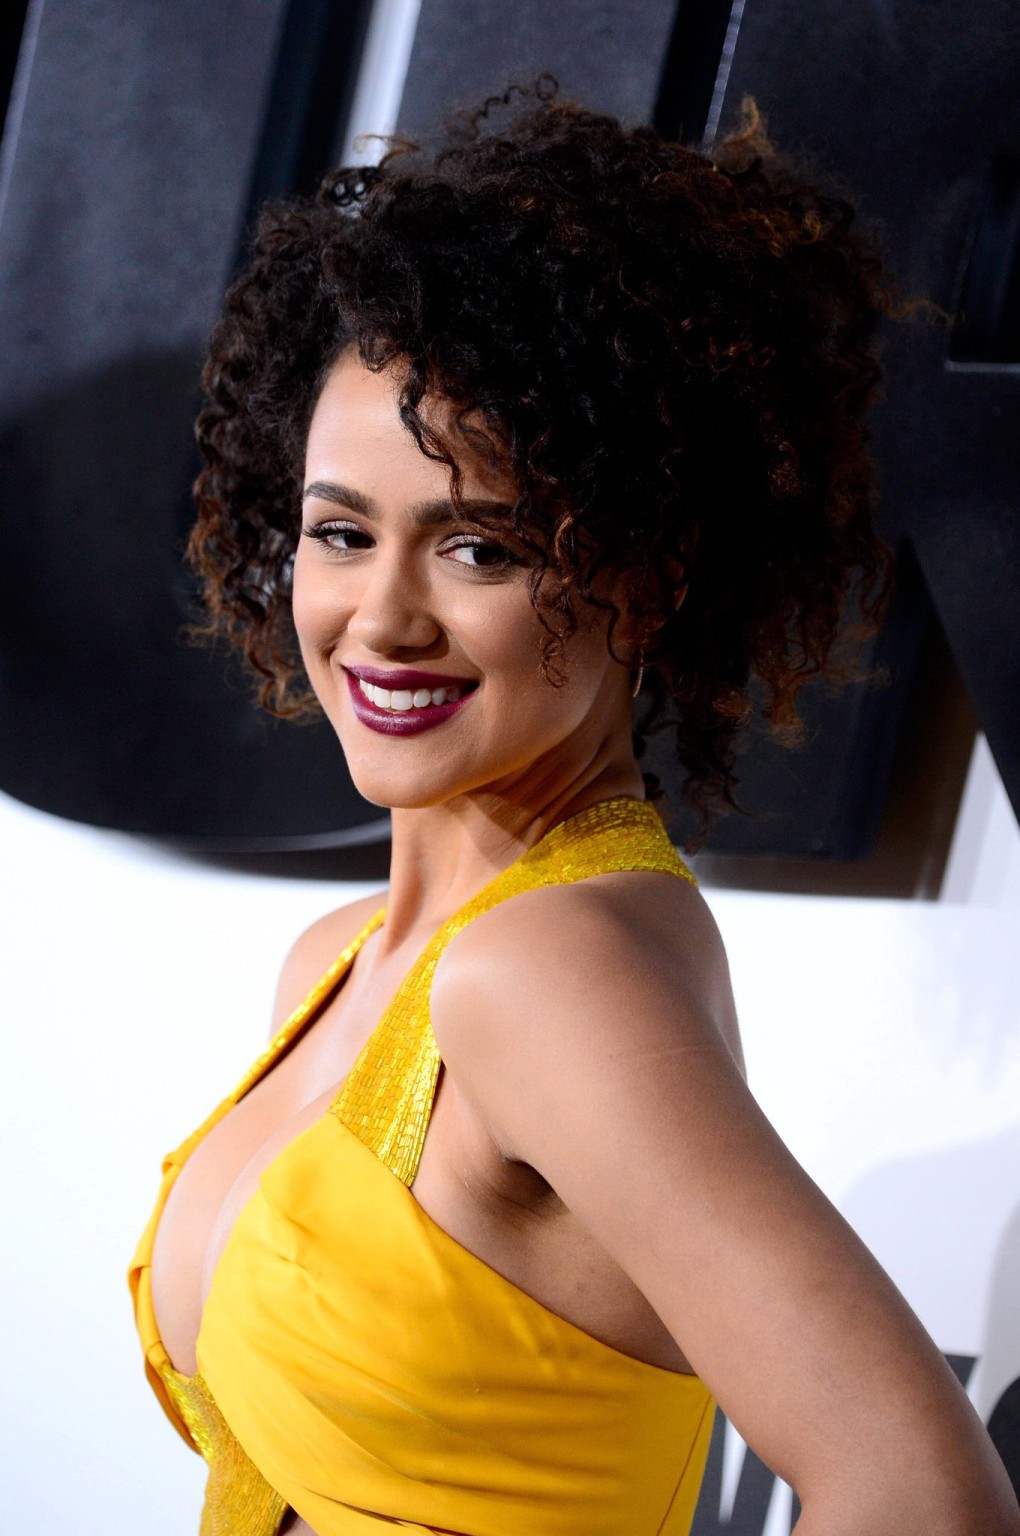 Nathalie Emmanuel showing huge cleavage at the Furious 7 premiere in Hollywood #75168418